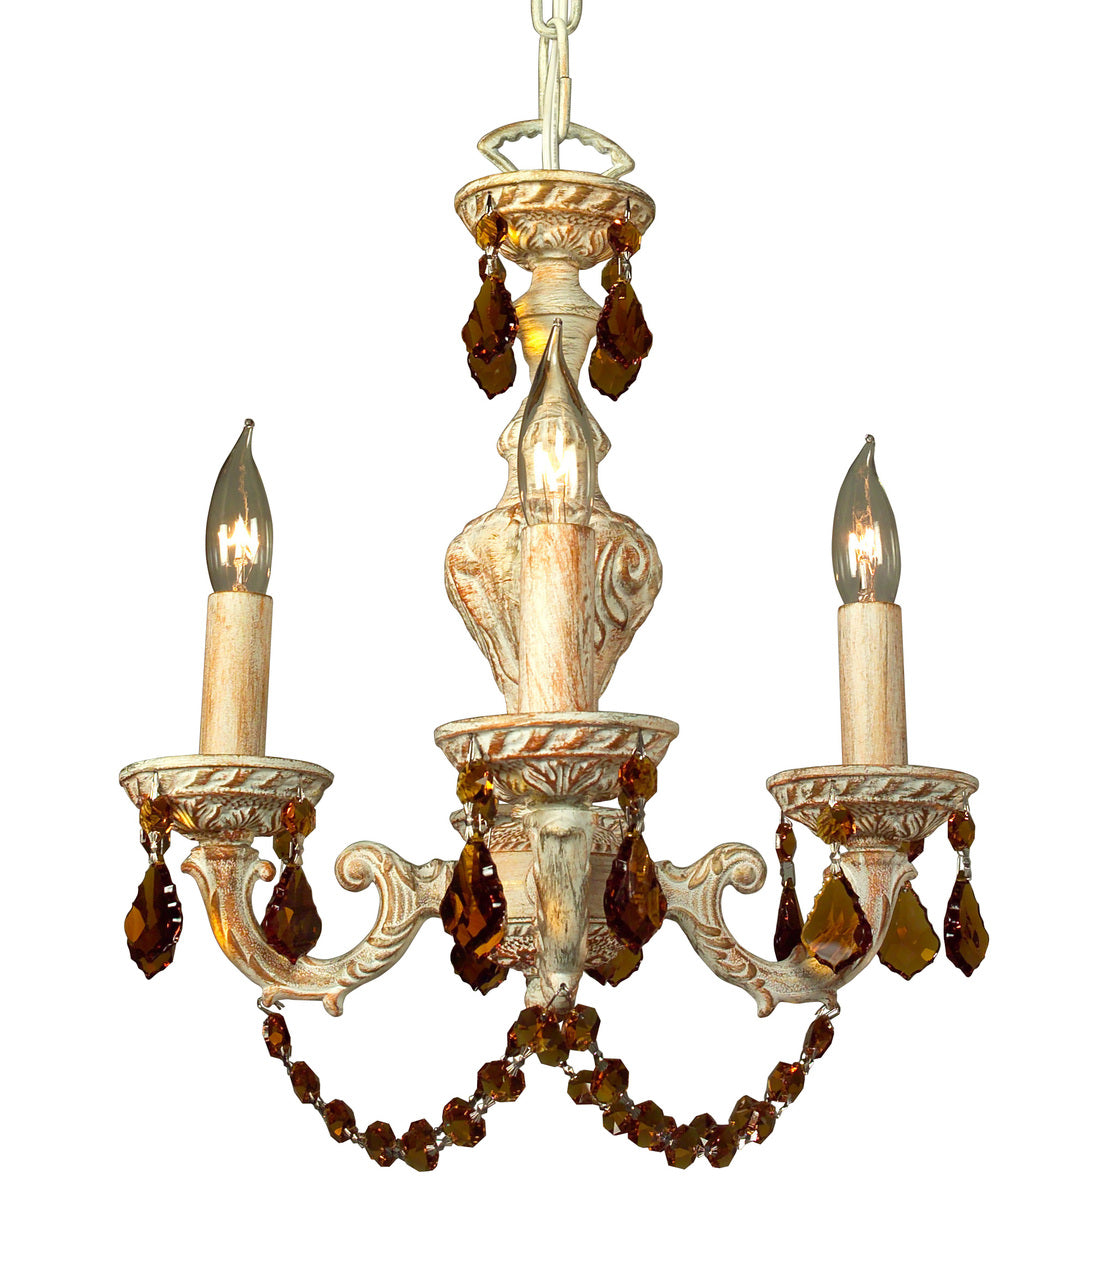 Classic Lighting 8335 AMB CP Gabrielle Crystal Mini Chandelier in Amber/Antique White